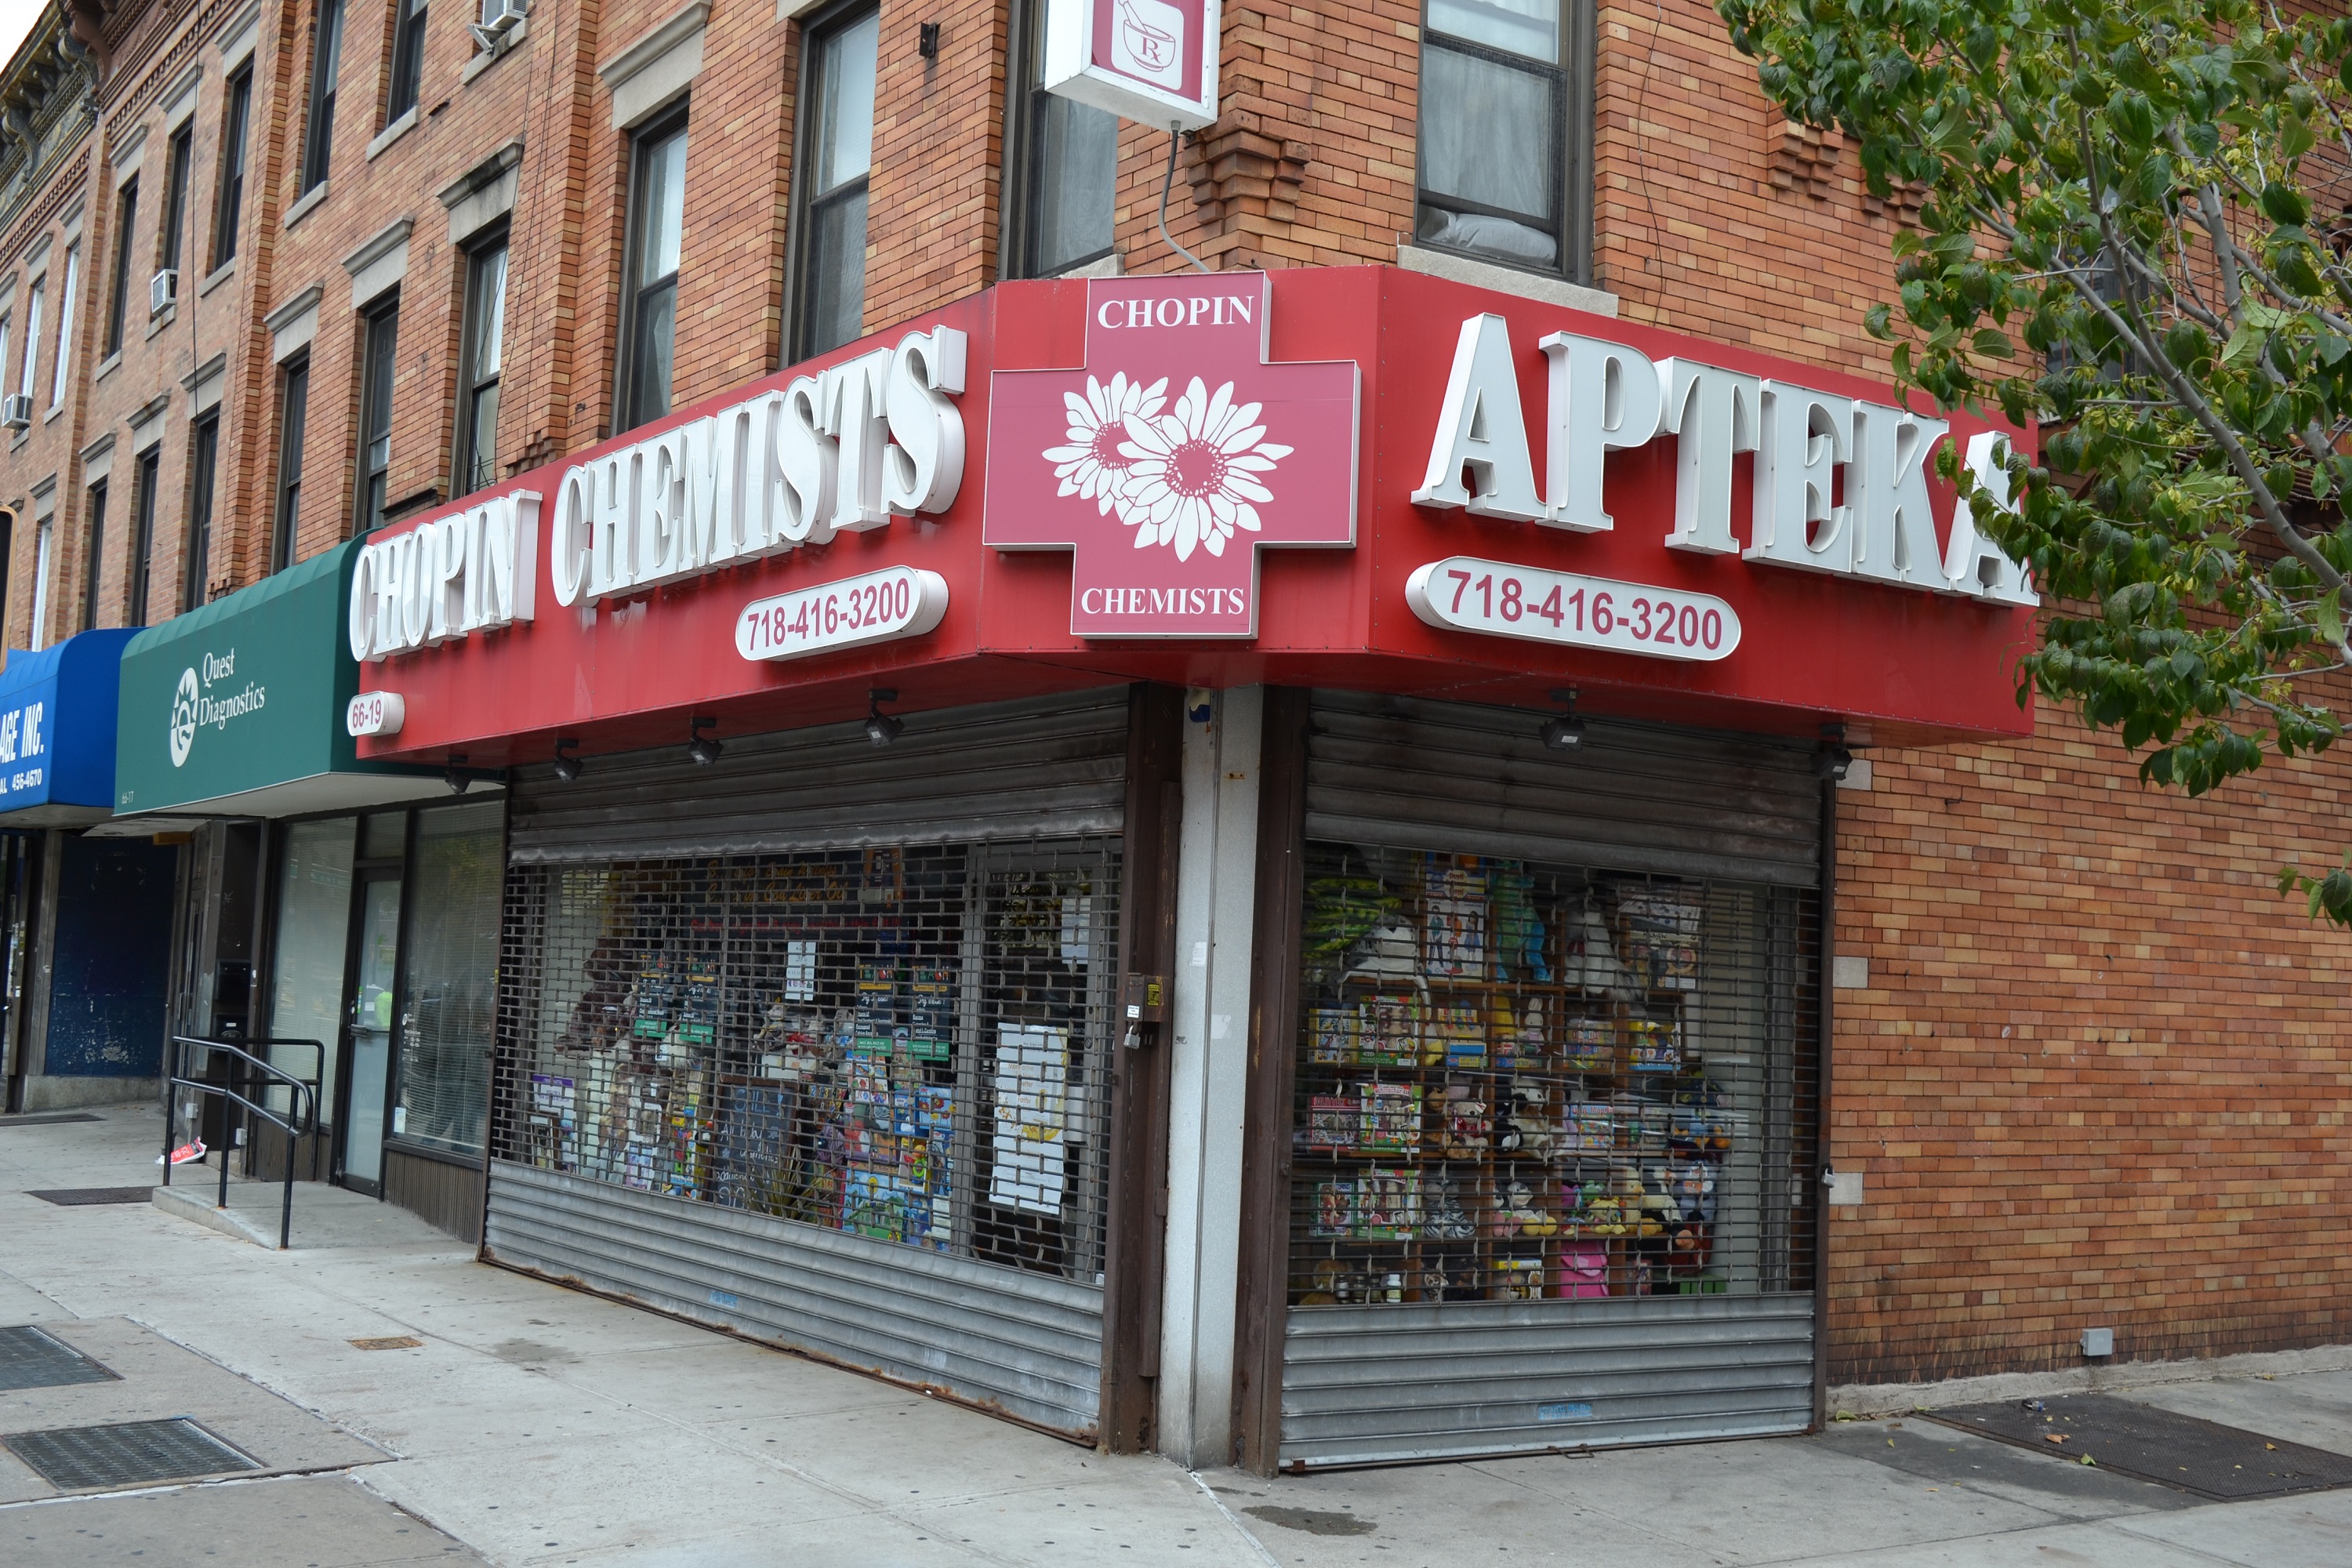 The gates were down at Chopin Chemists on Fresh Pond Road in Ridgewood Thursday after its owners were indicted on charges that they illegally distributed thousands of oxycodone pills.